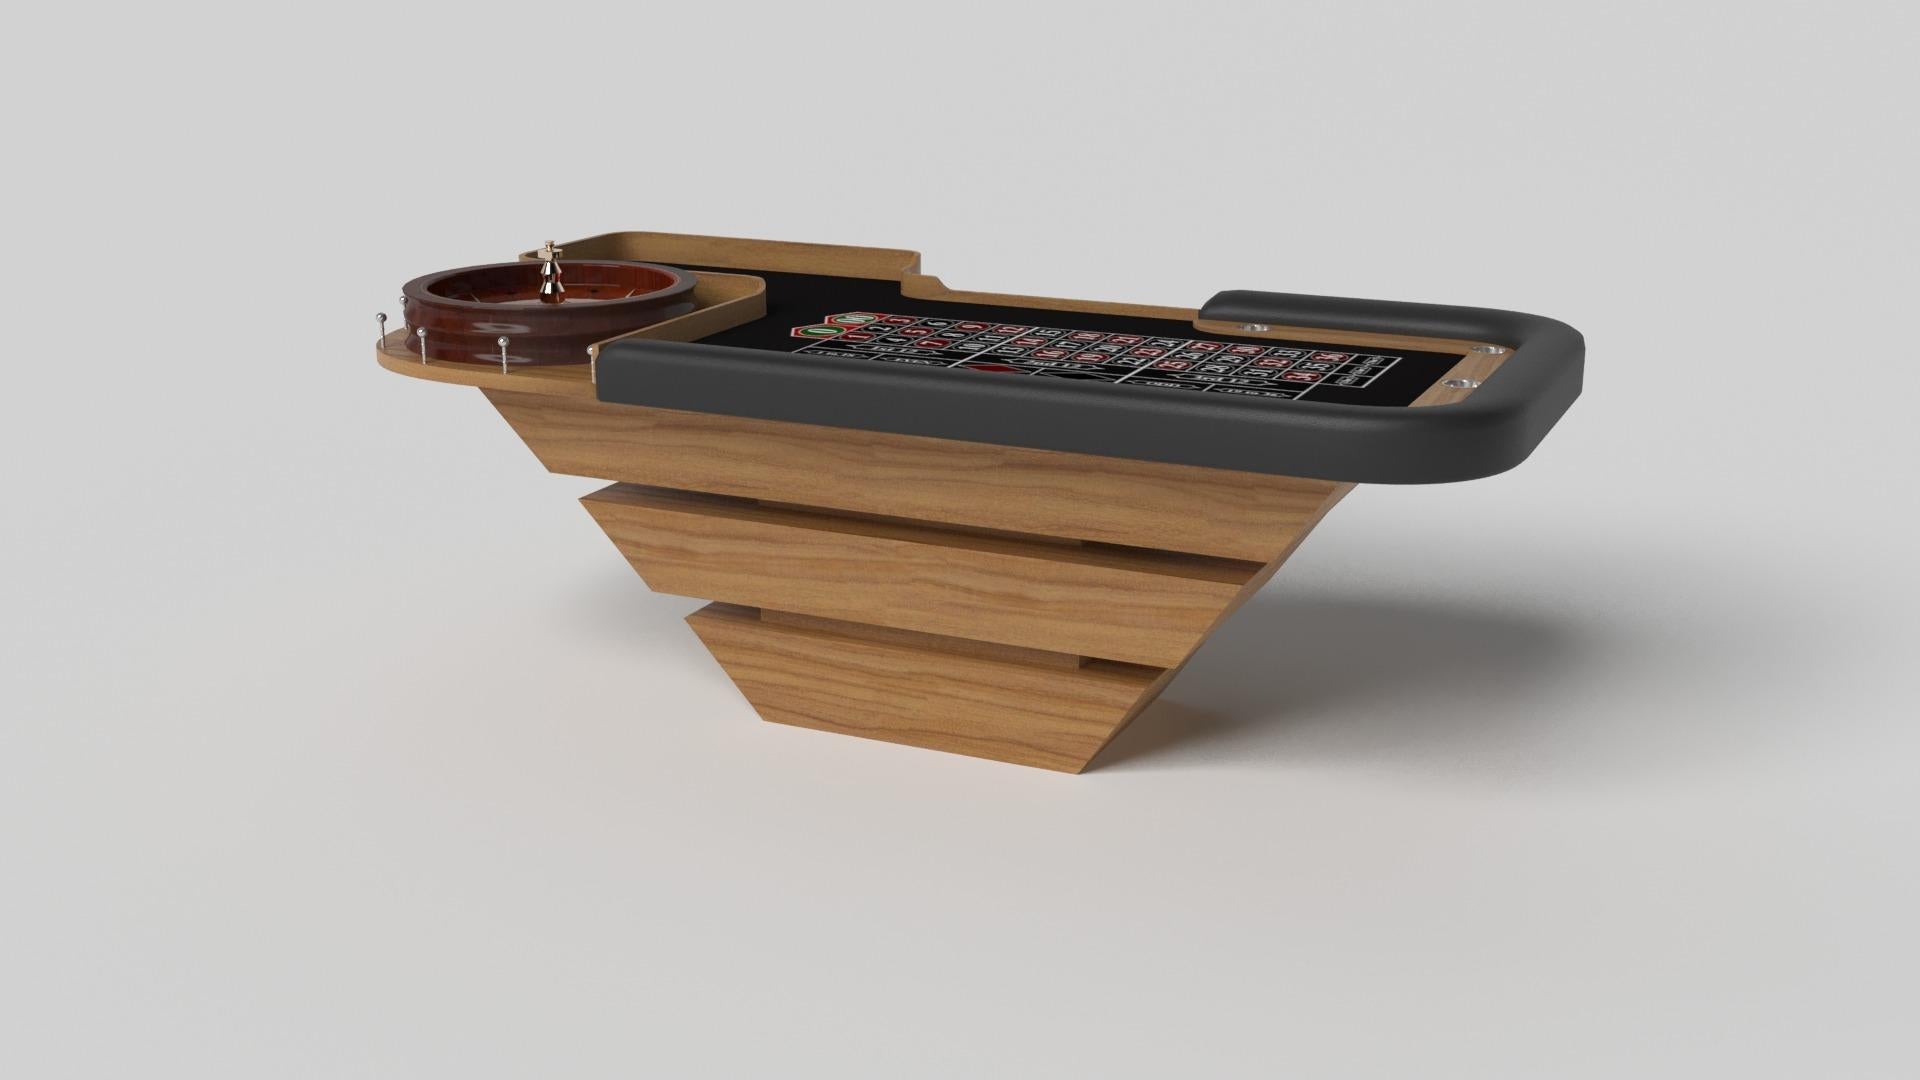 Three solid pieces of wood seemingly float around a concealed center base, making the Louve roulette table in chrome one of our most mind-bending designs. Crafted from solid metal and detailed with betting boxes and an American wheel, this